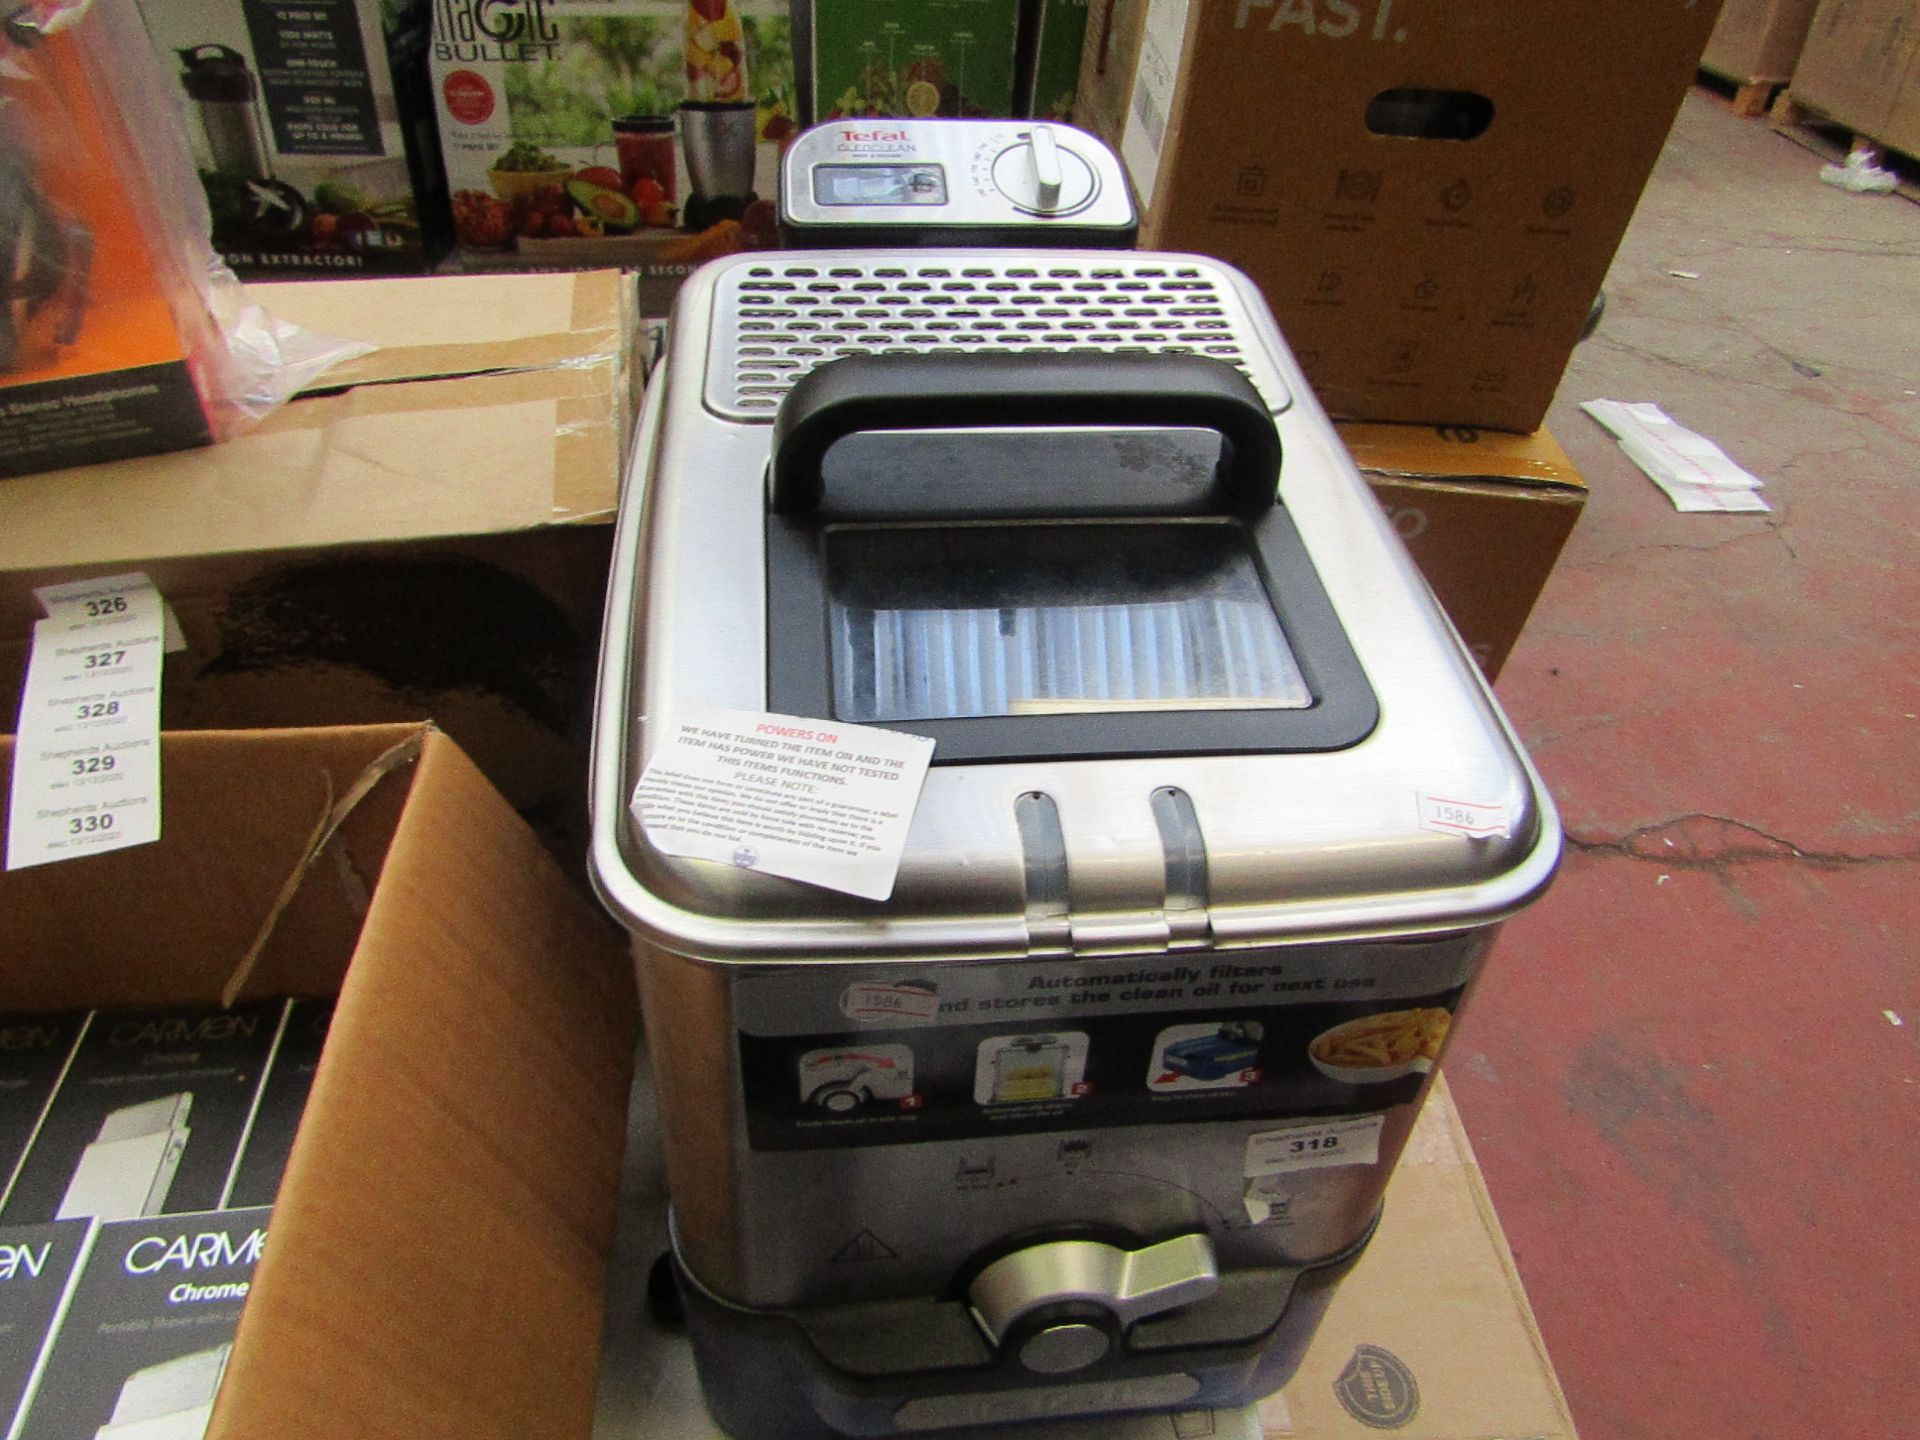 Tefal auto filter deep fryer, tested working.